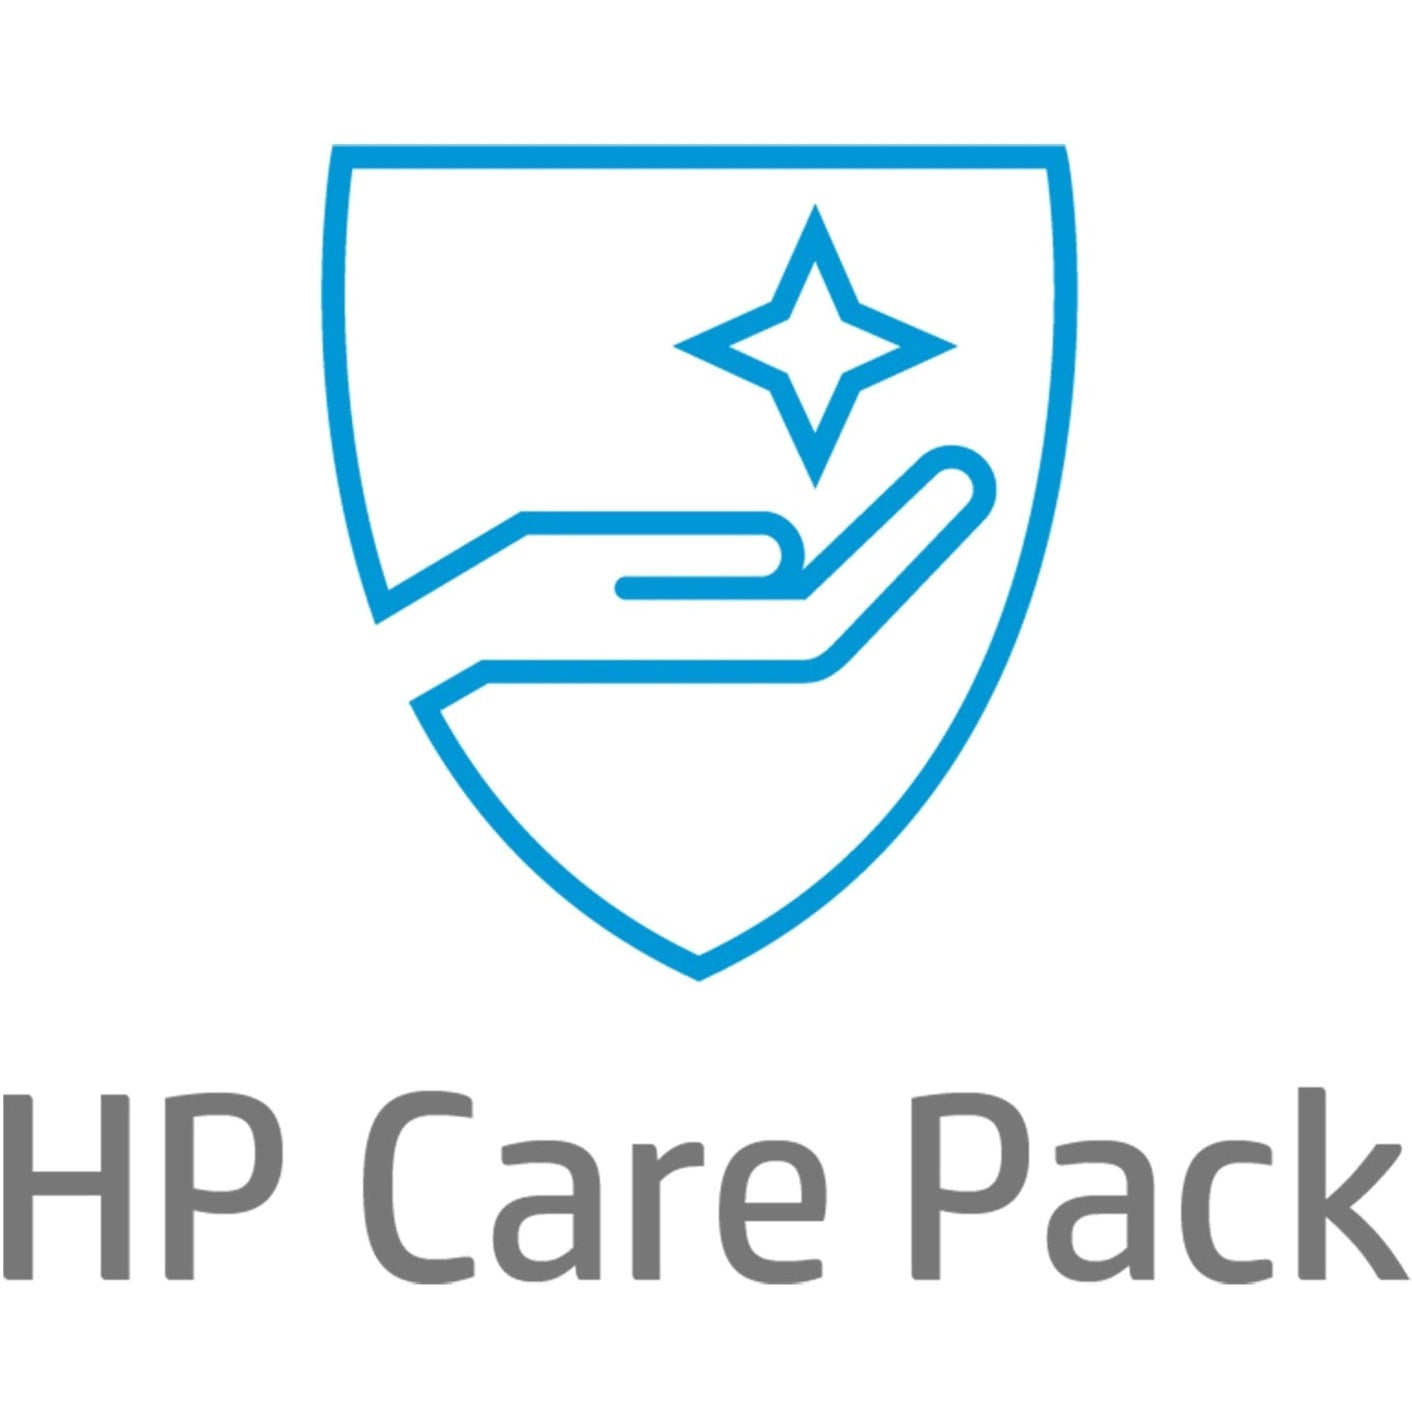 HP Care Pack - Extended Warranty - 3 Year - Warranty (UB5G2E)